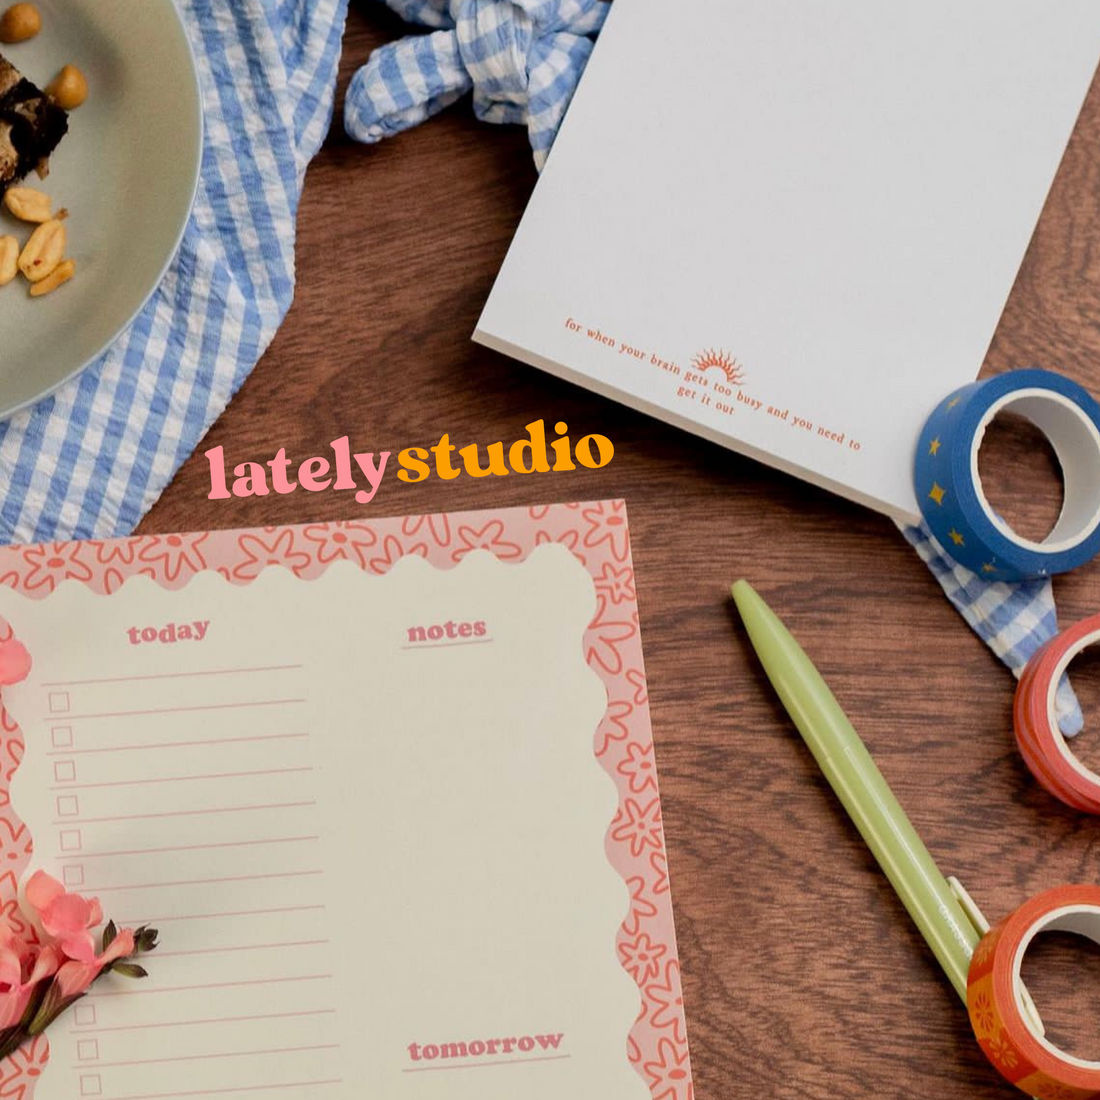 The Small Business Diaries - Lately Studio